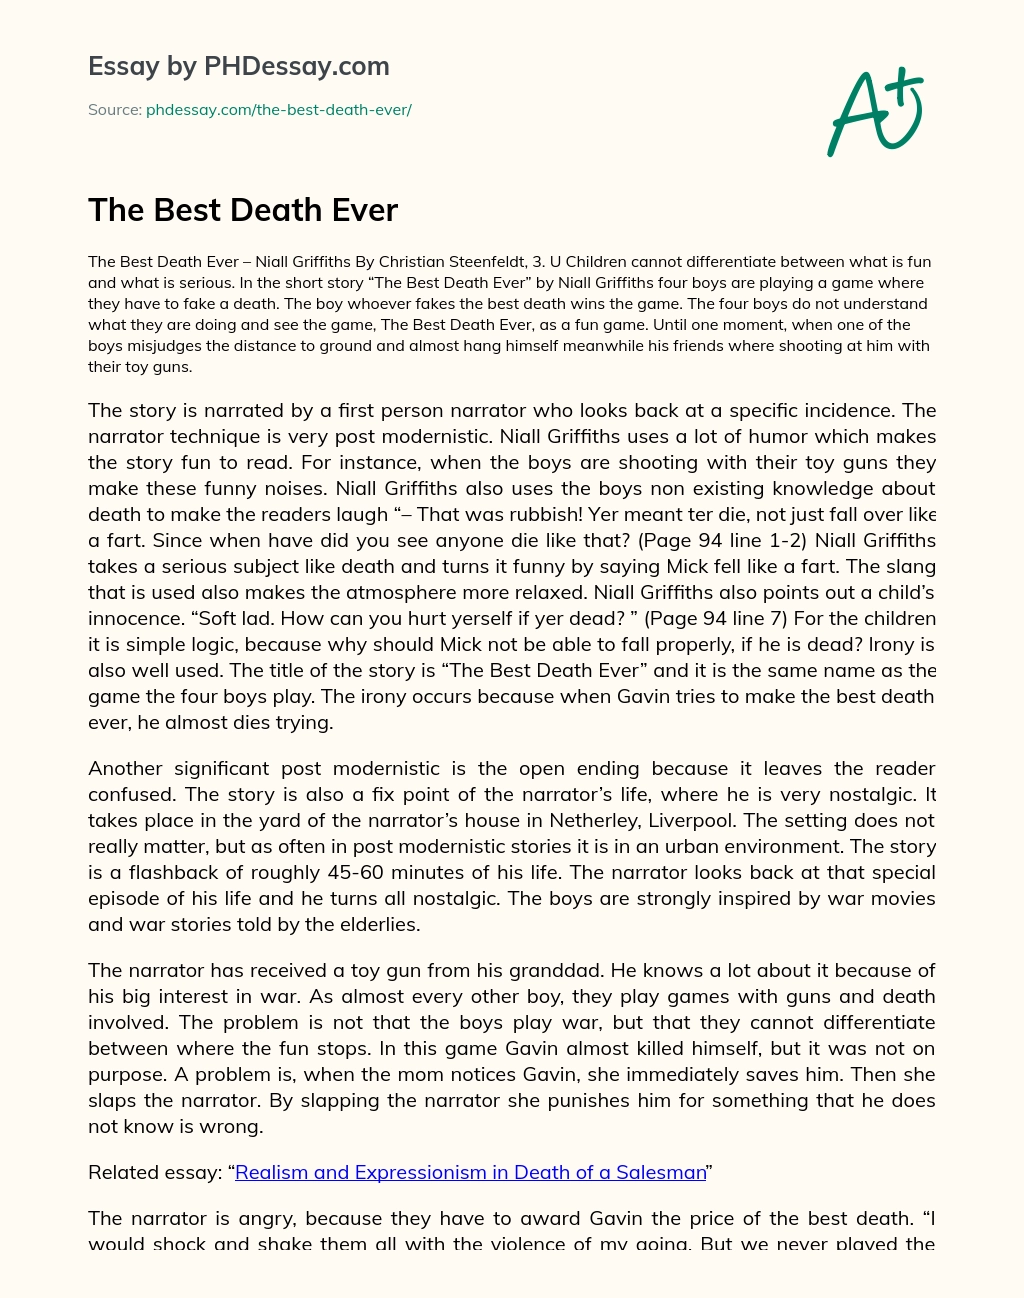 The Best Death Ever essay